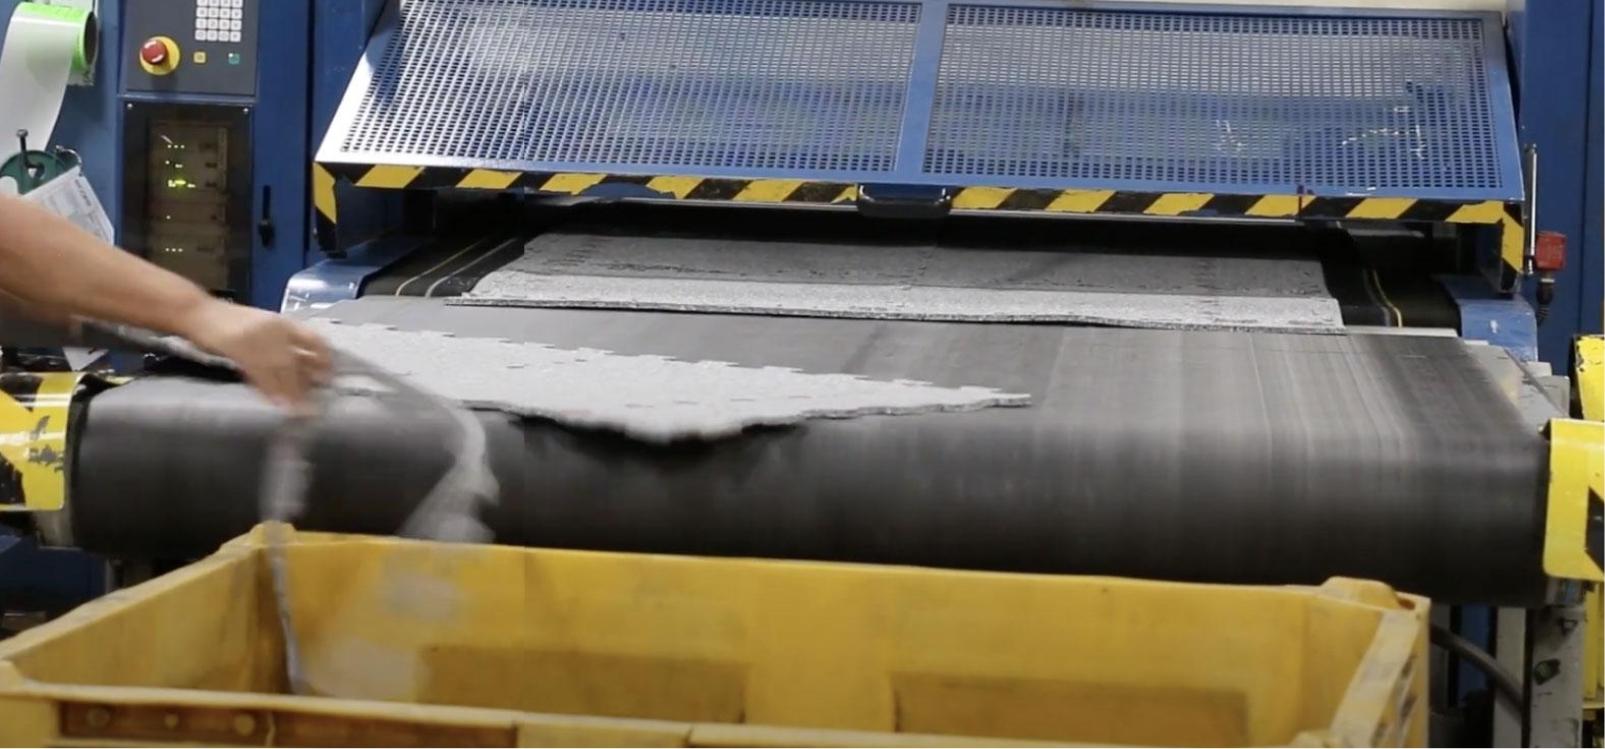 Worker handling a large sheet of rubber material through a machine in an industrial setting.